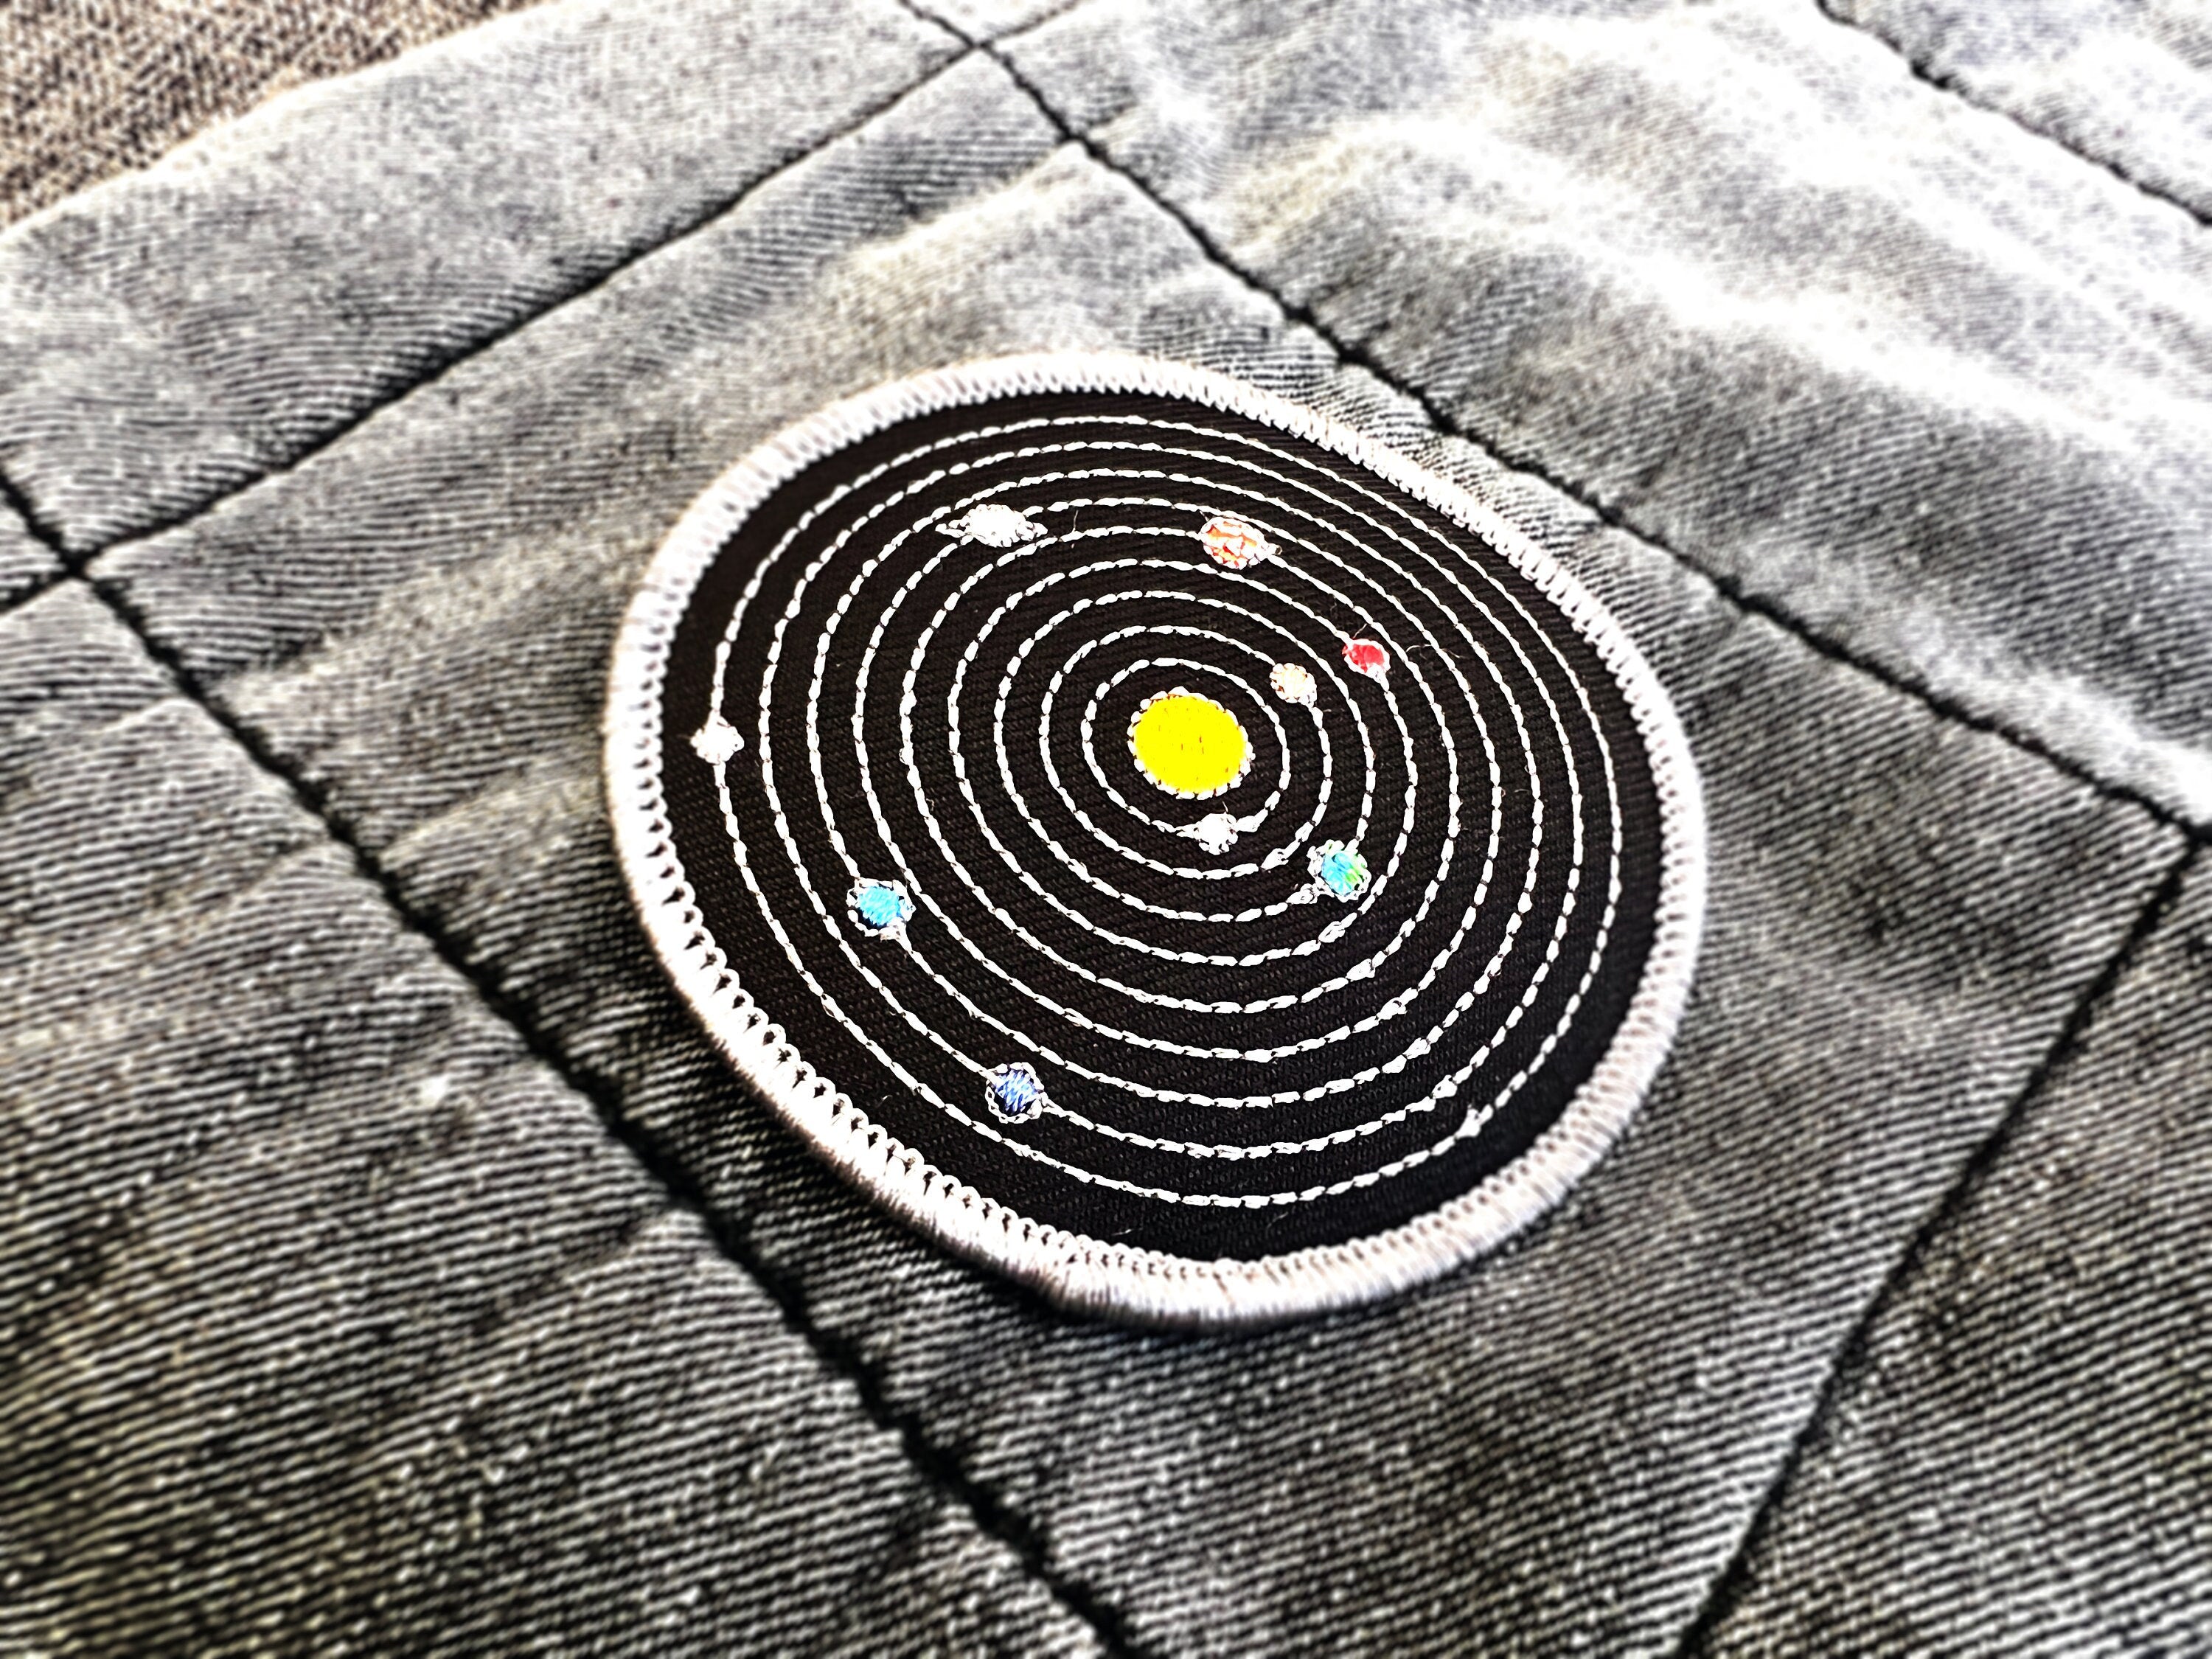 Voyager Solar System Patch - EDC Jacket Mission Patches - Golden Record Space Patch